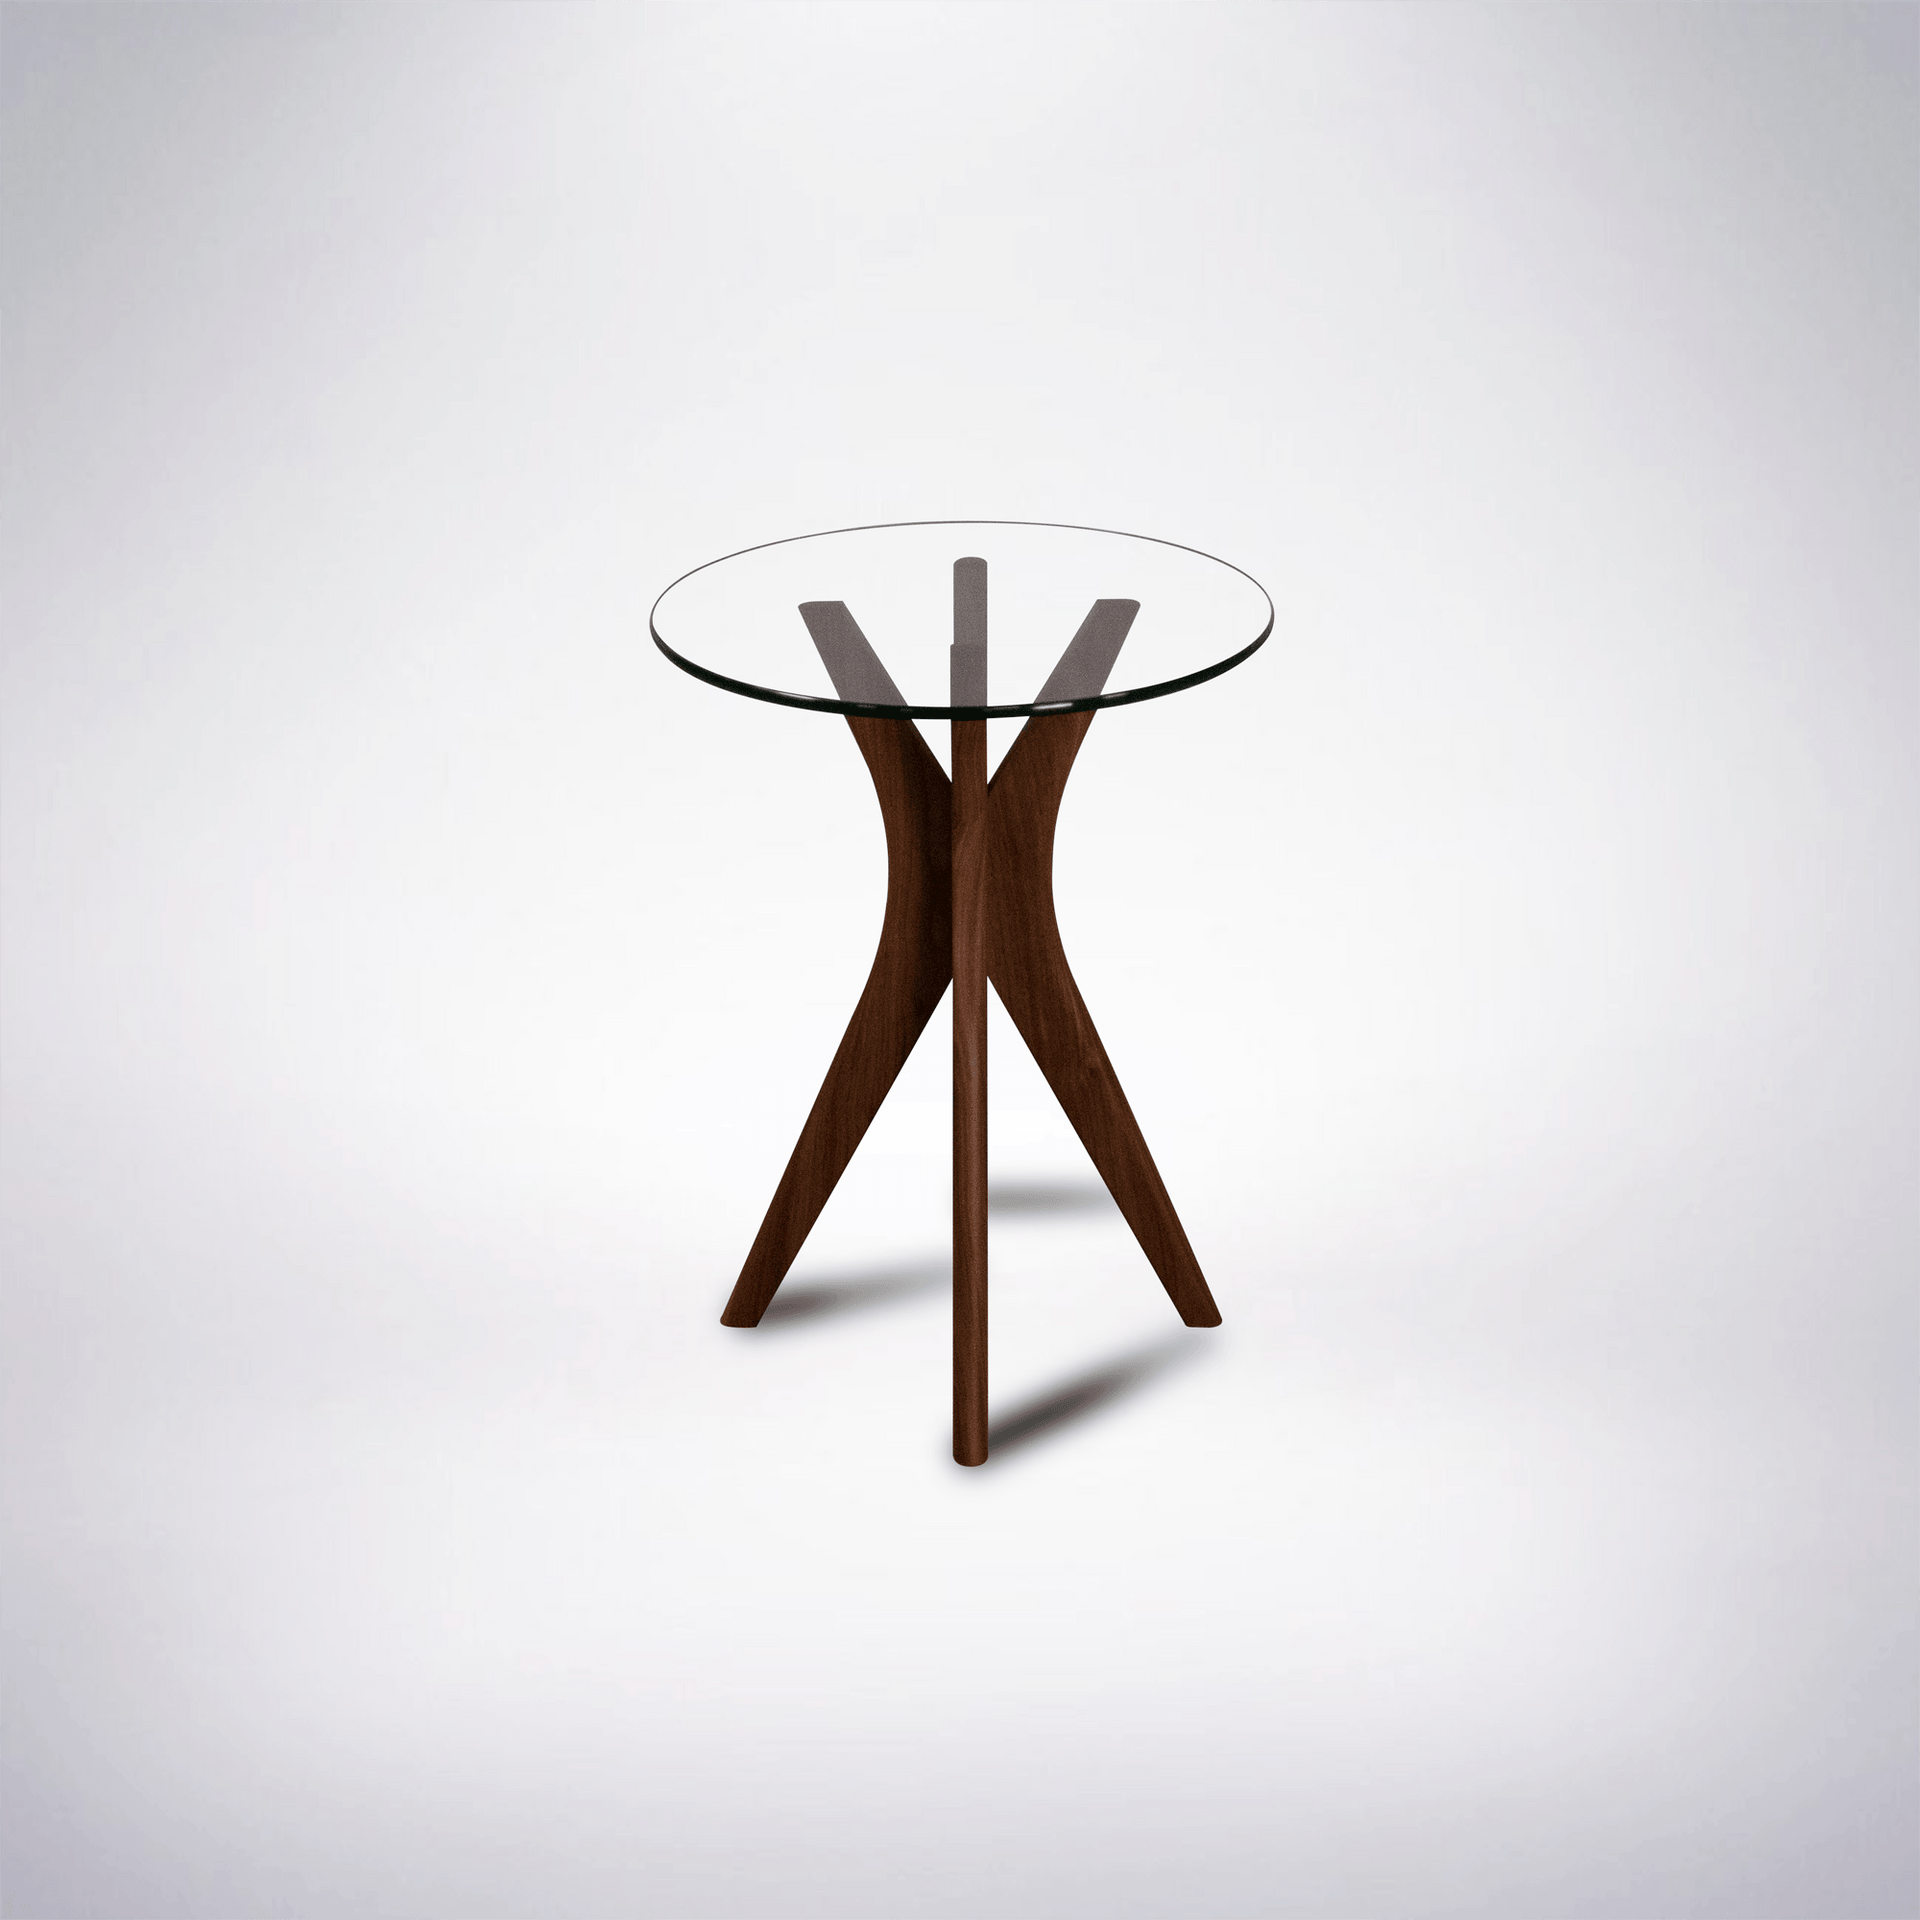 Solid wood pub table with a glass top